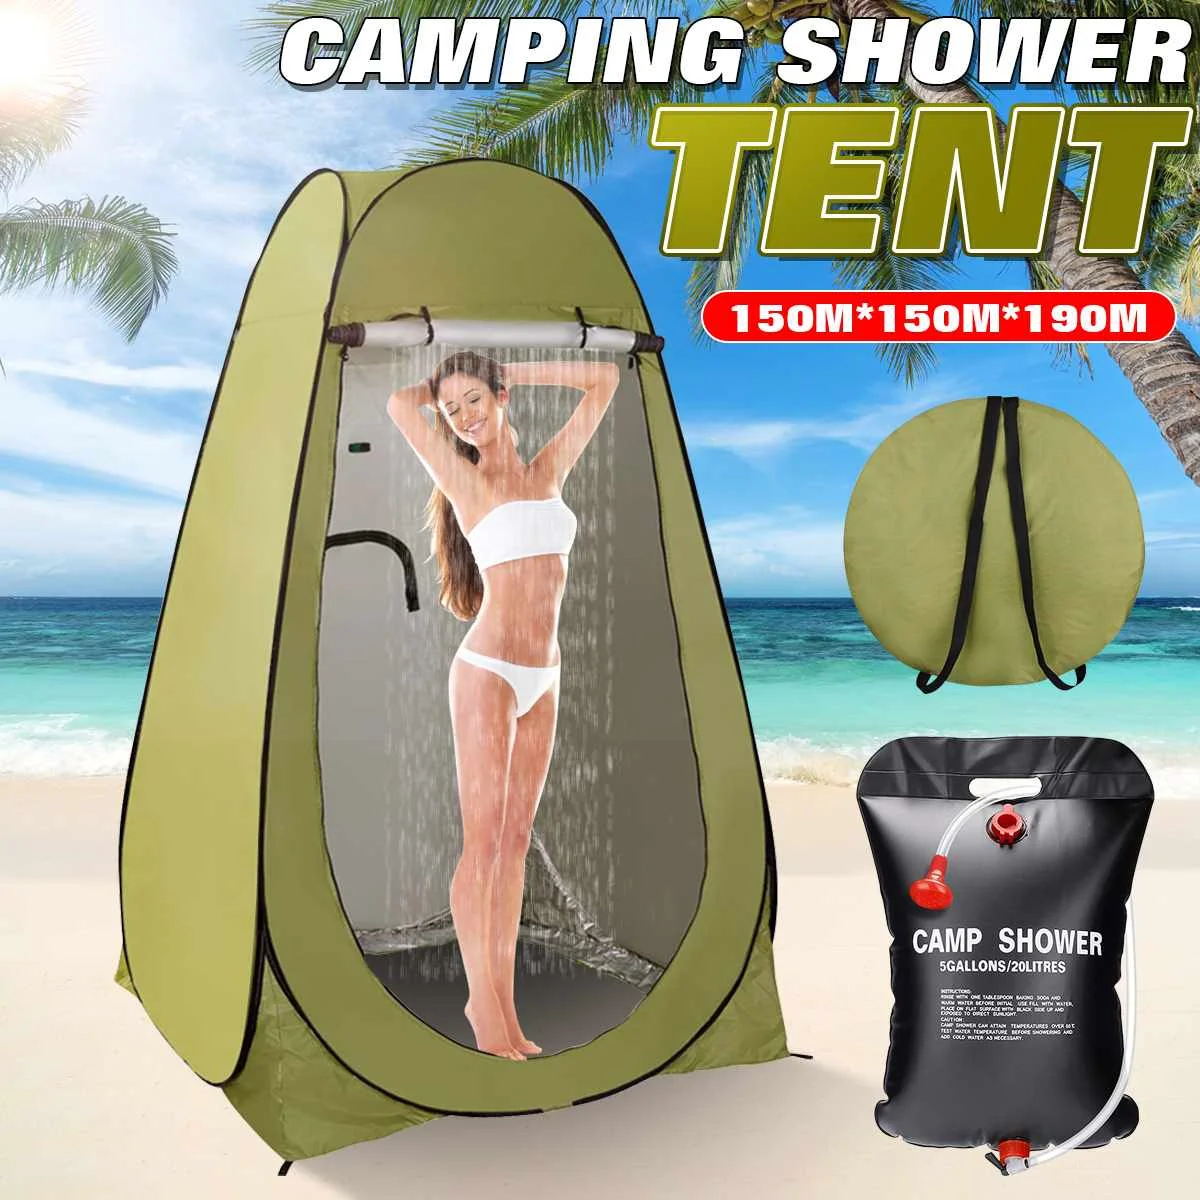 1-2 People 3 windows Portable Changing Room Privacy Tent Shower Tent Camp Toilet Rain Shelter for Outdoor Camping Hiking Beach